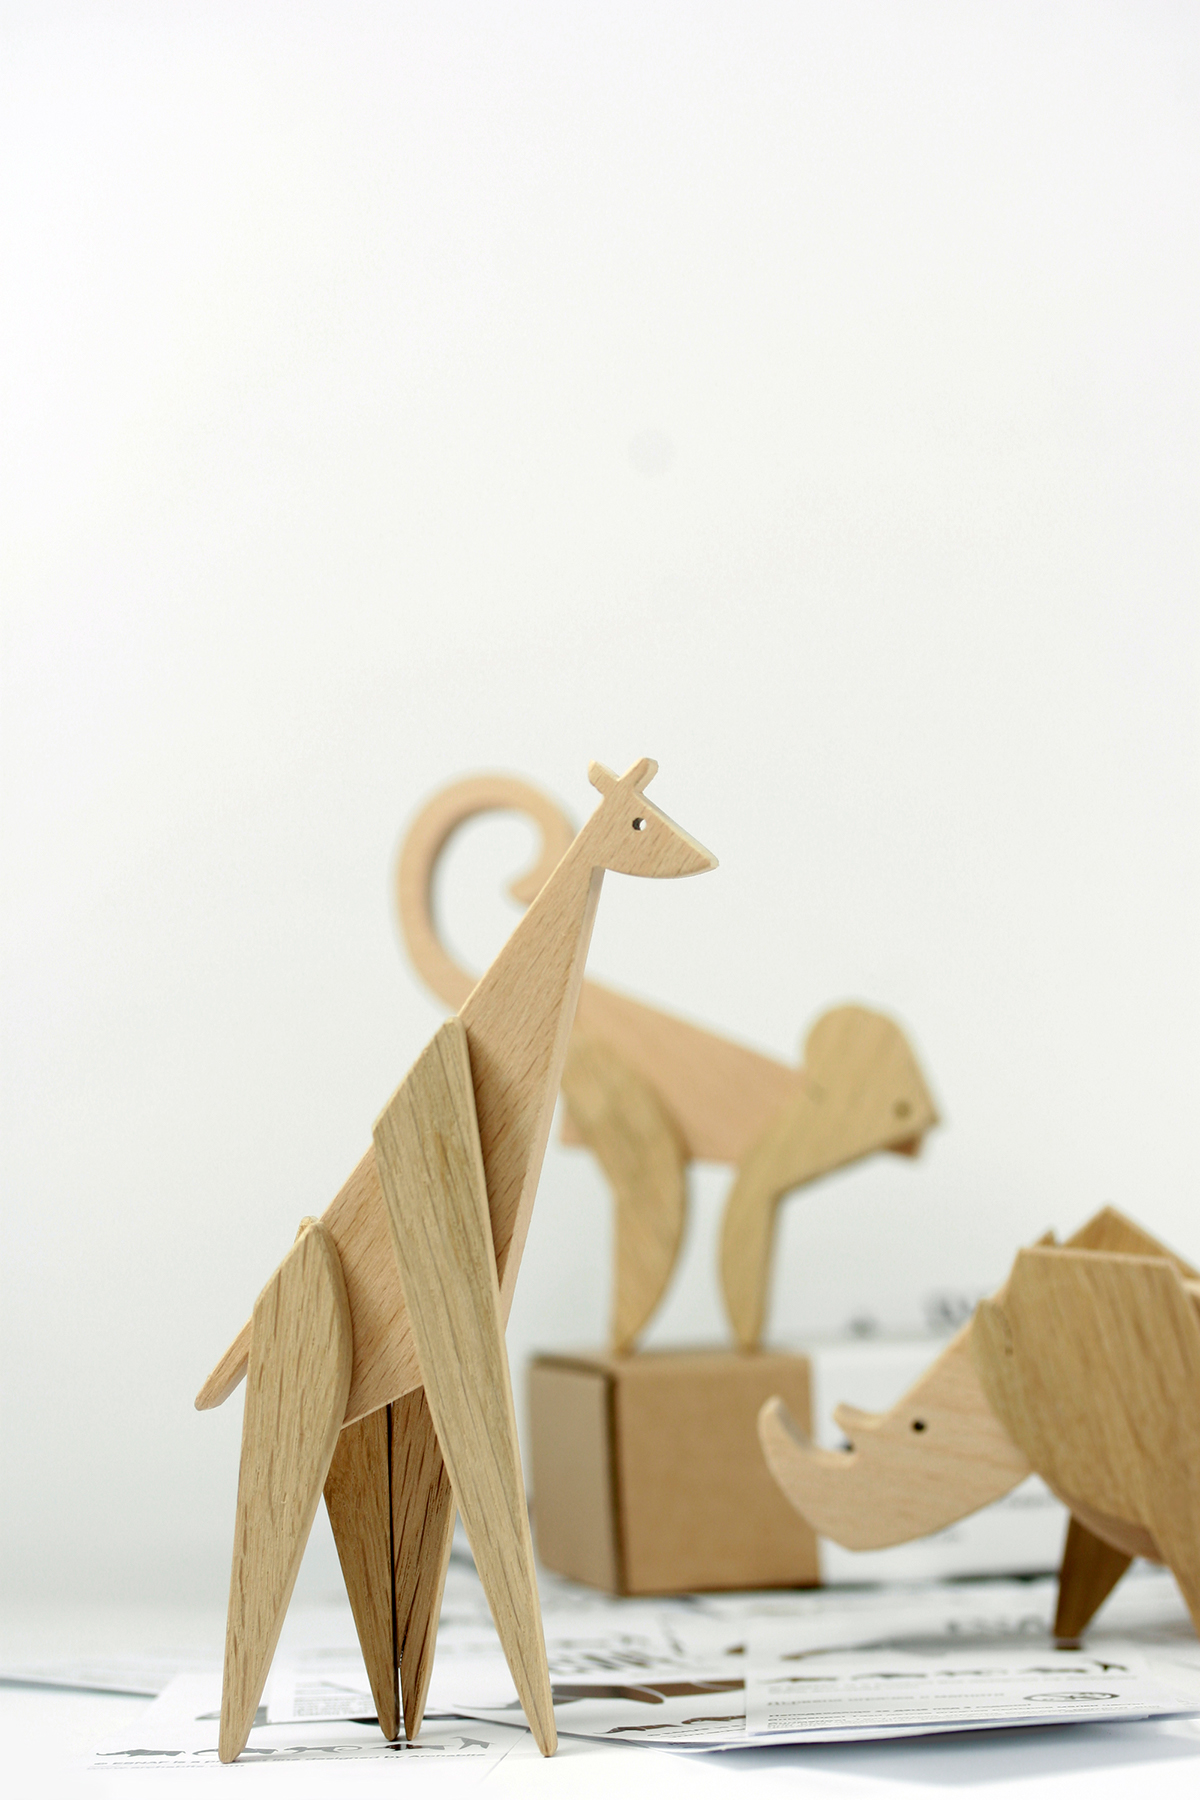 animals wooden toys wooden toys design product wood animal toy